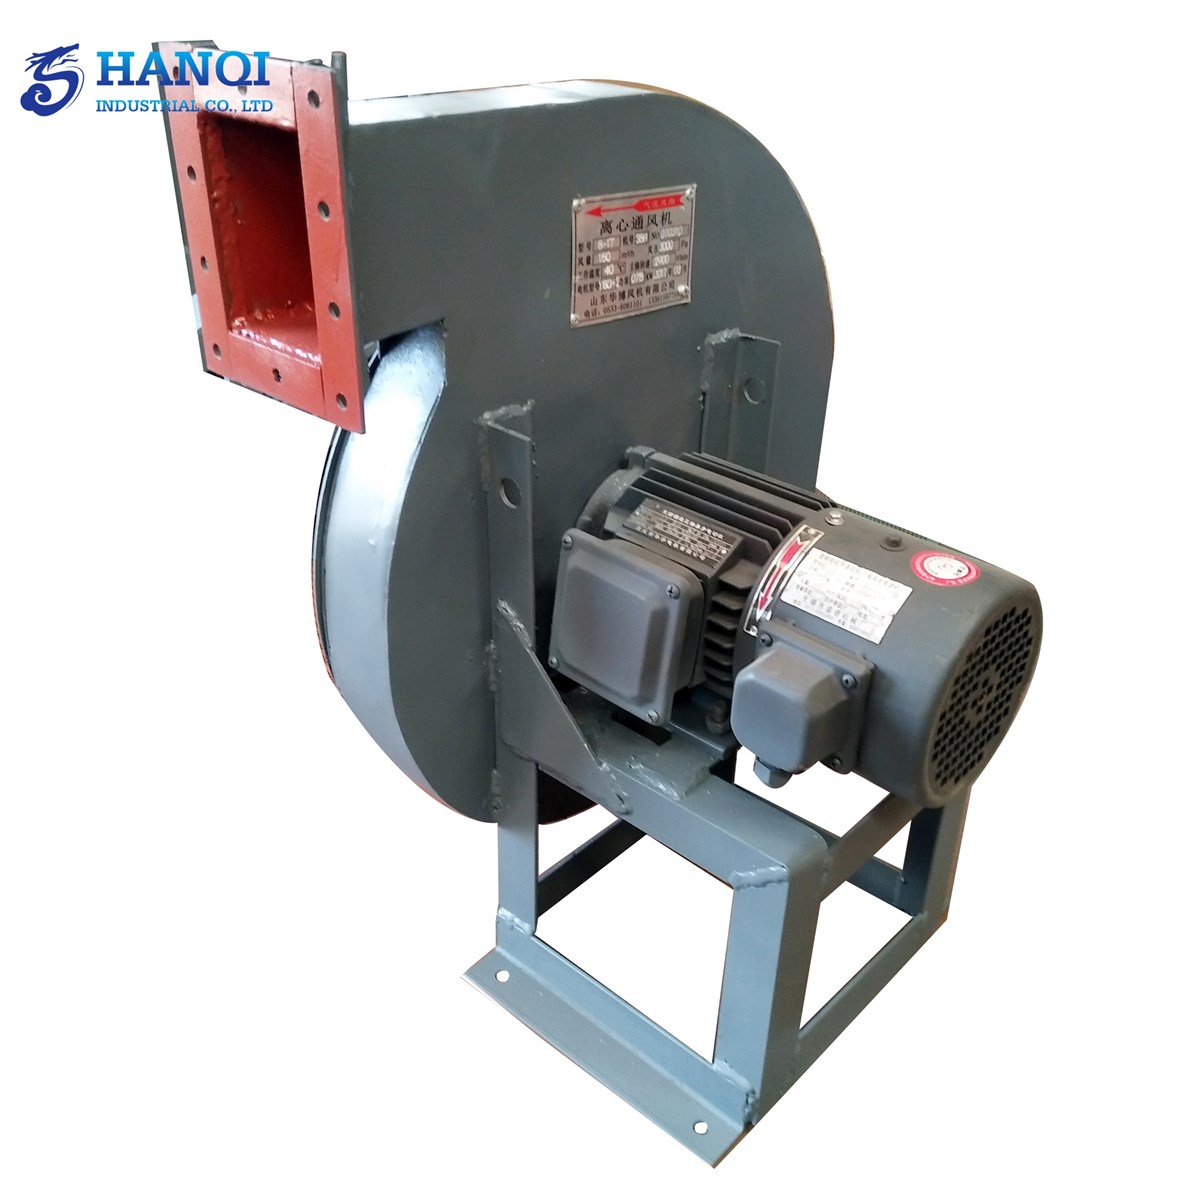 Industrial High Pressure Centrifugal Fan Blower for Ventilator and Air Cooling of ForgeFurnace Plant From OEM